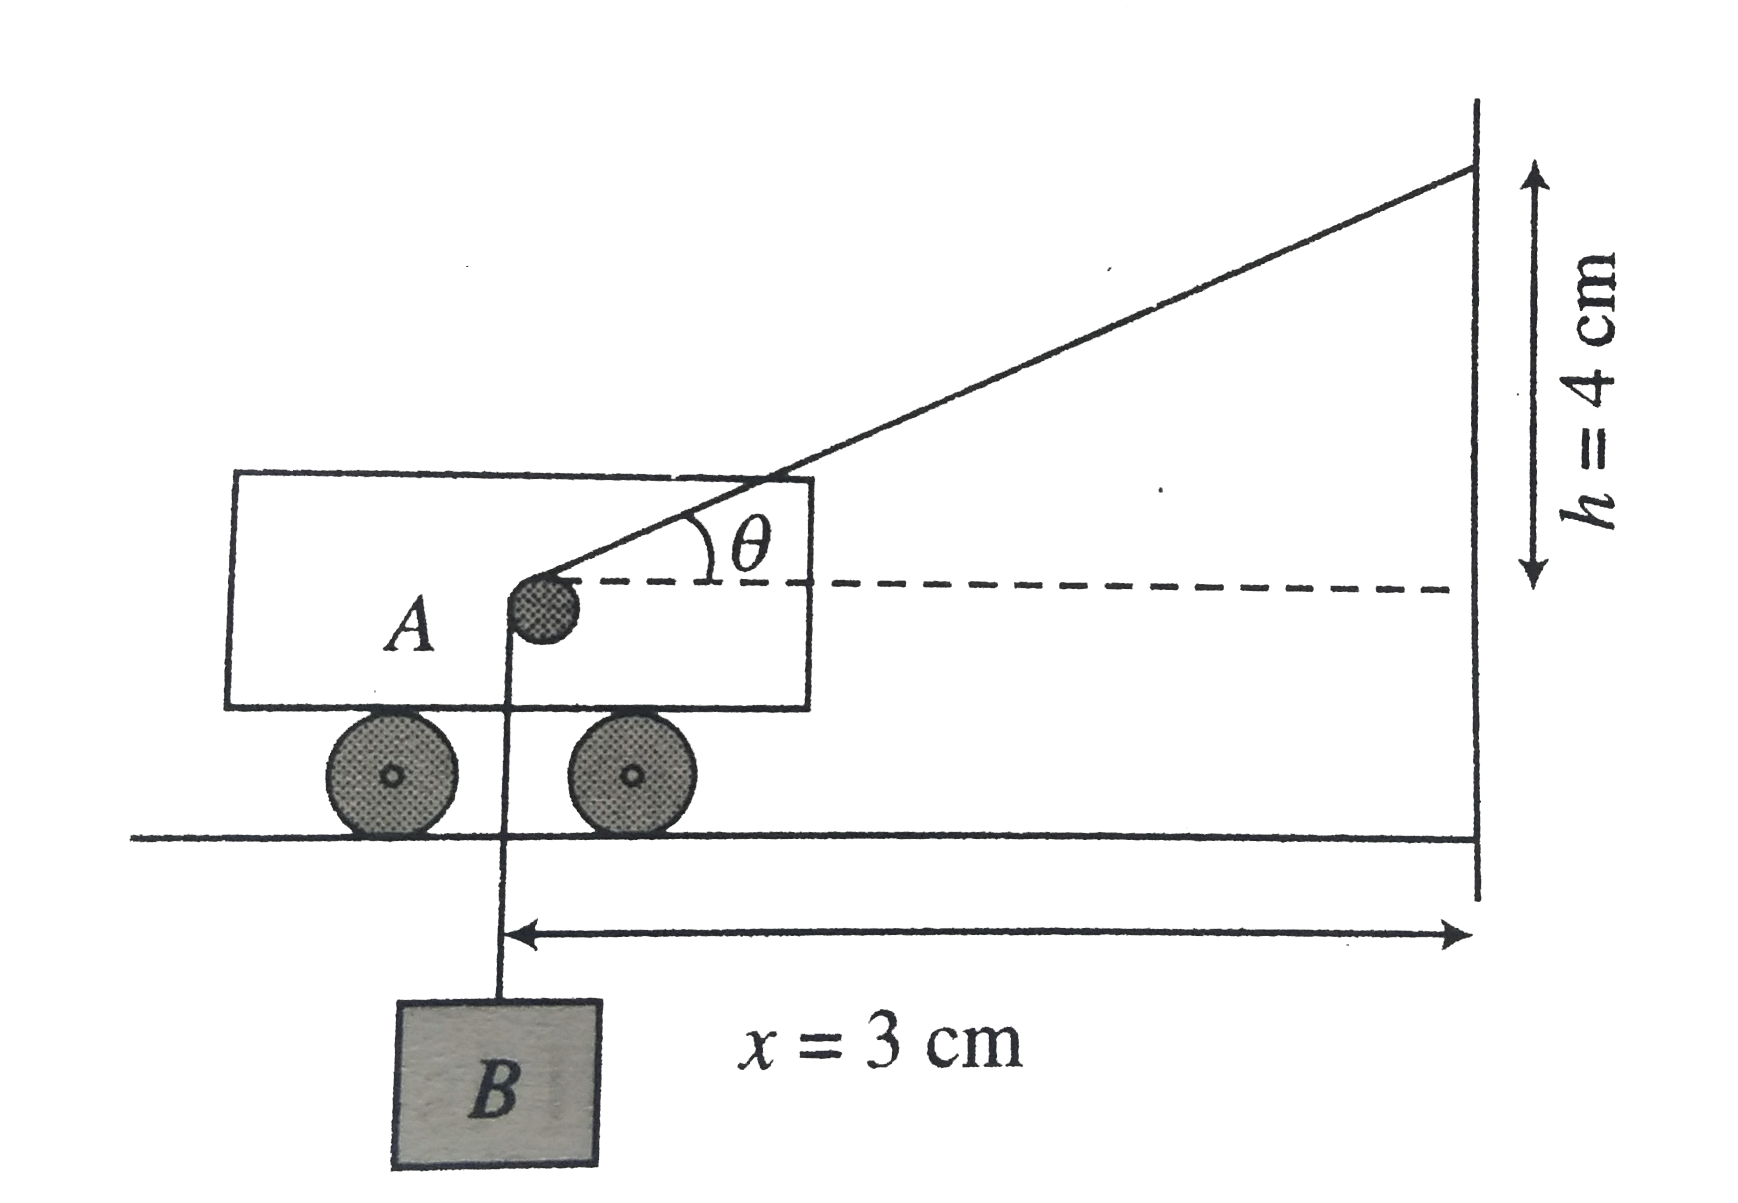 The string in fig. is passing over small smooth pulley rigidly attached to trolley A. If the speed of trolley is constant and qual to v(A) towards right, speed and magnitude of acceleration of block B at the instant shown in figure are